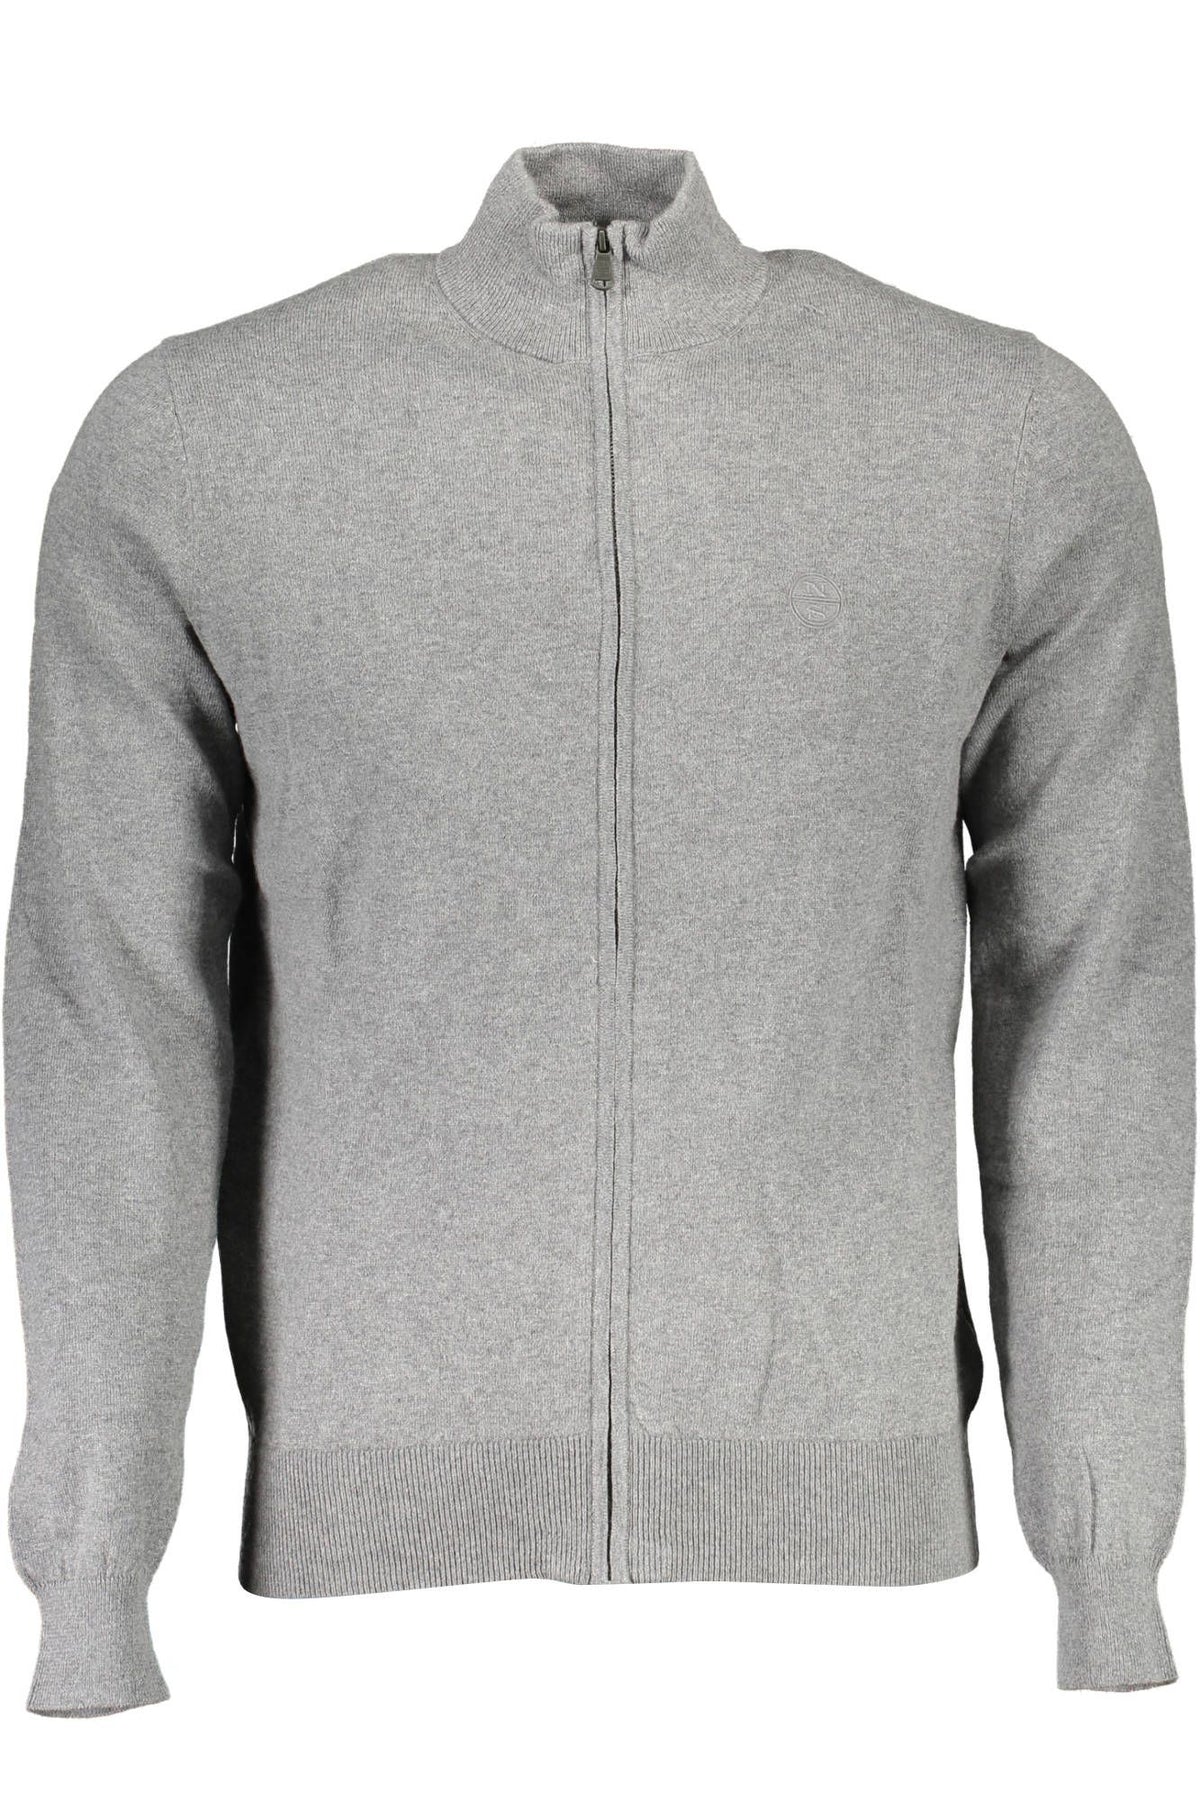 North Sails Sleek Gray Zip-Up Cardigan with Embroidered Logo